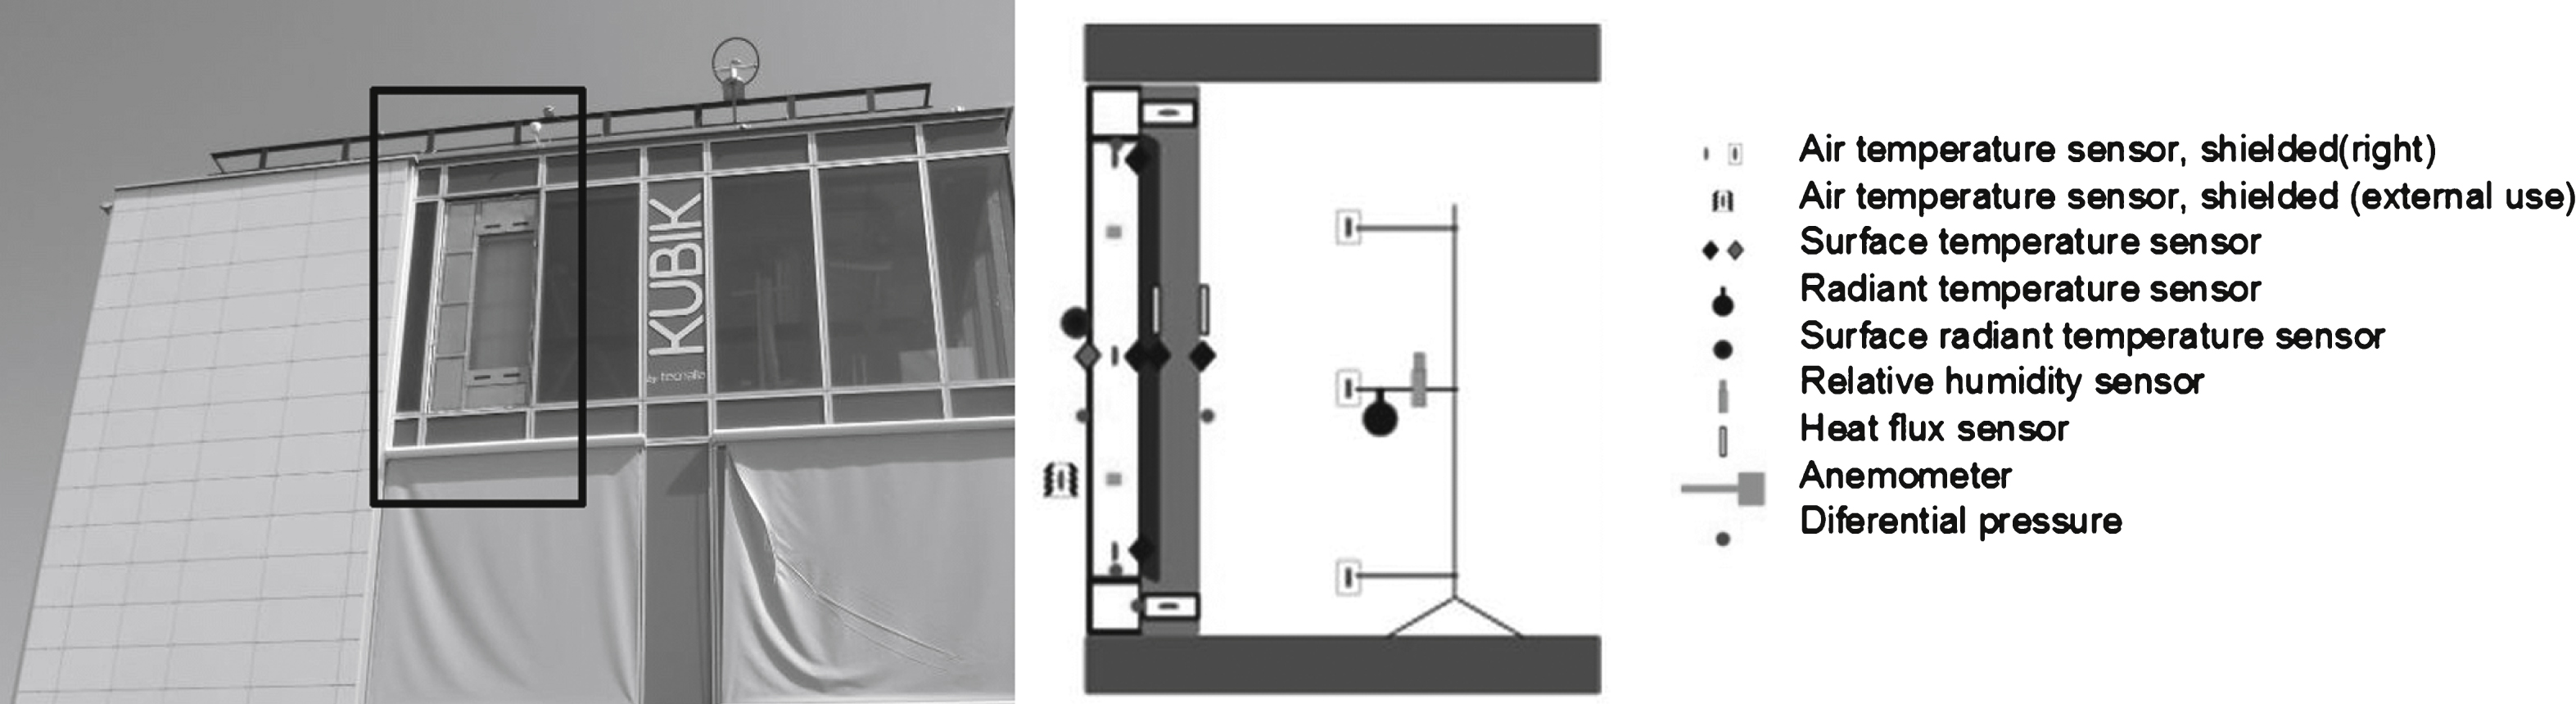 View of the PCMESW system installed in the southern facade of the Kubik building (left) and schematic layout of the installed sensors (right).